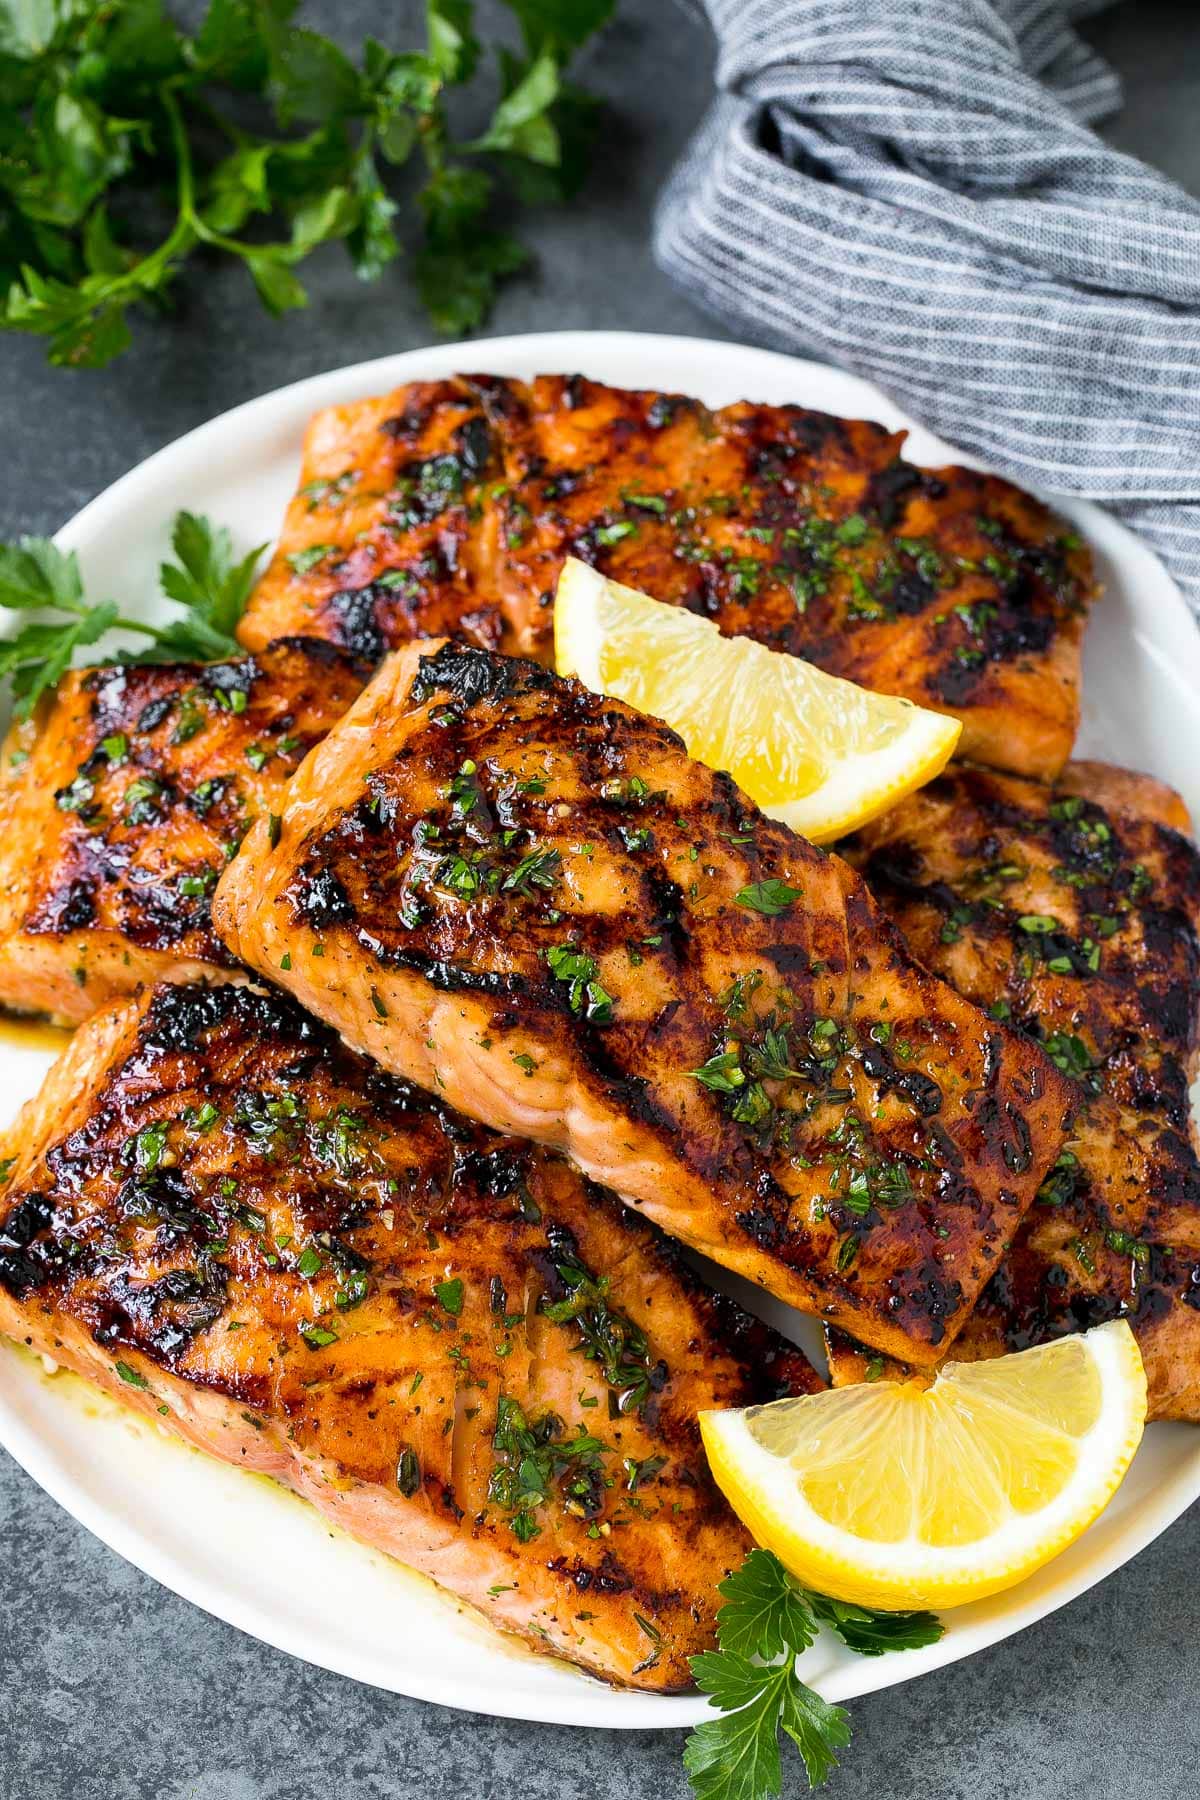 A plate of grilled salmon fillets garnished with lemon and herbs.